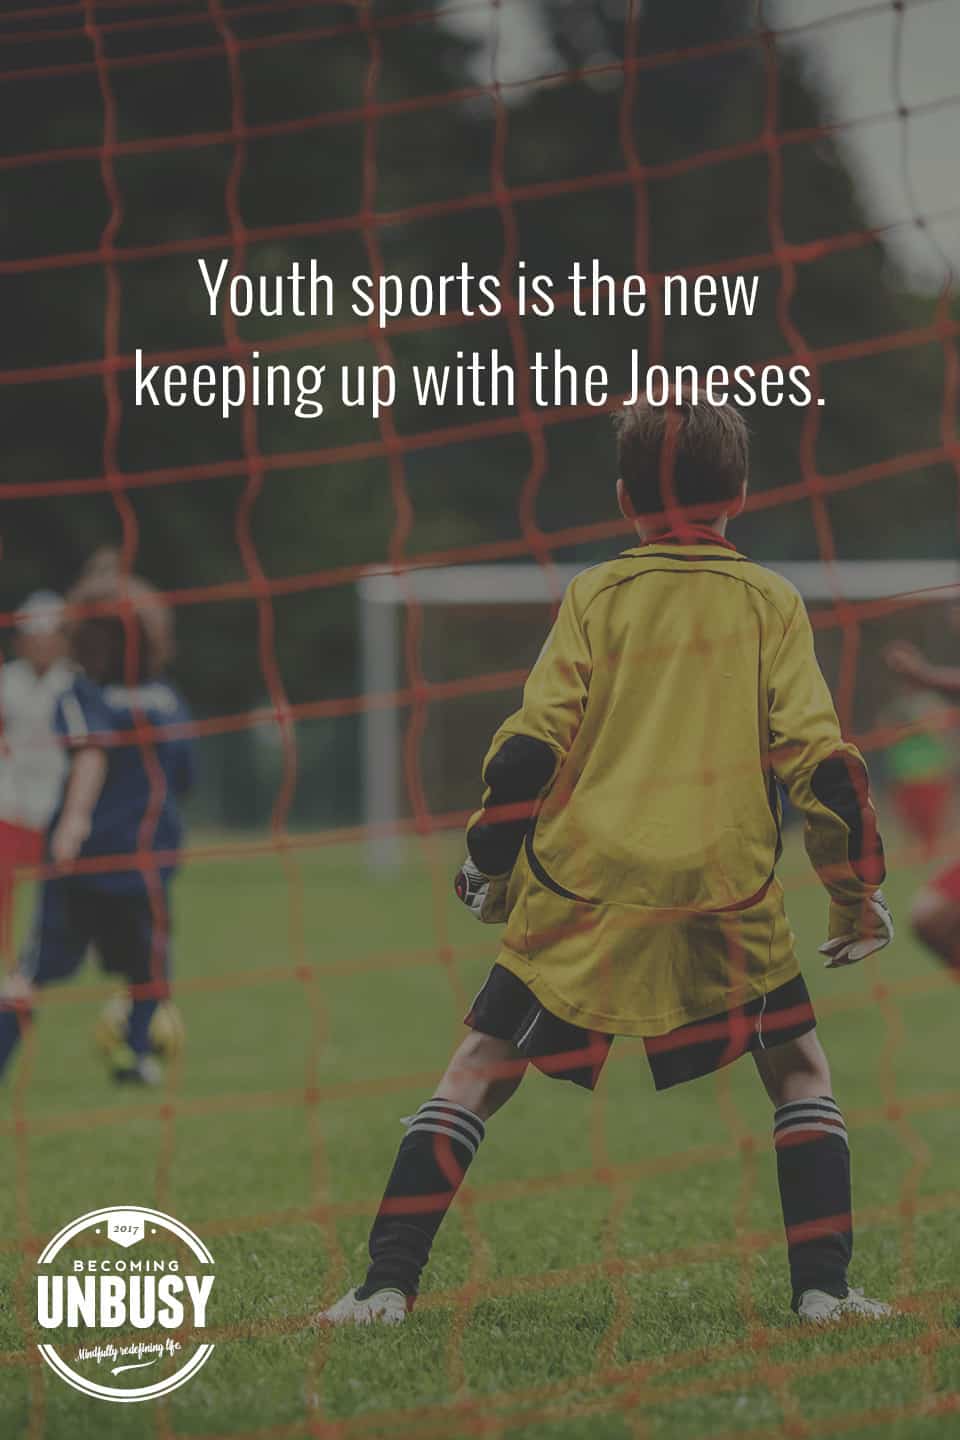 Youth sports is the new keeping up with the Joneses. — Michael S. Rosenwald *This quote. So true.